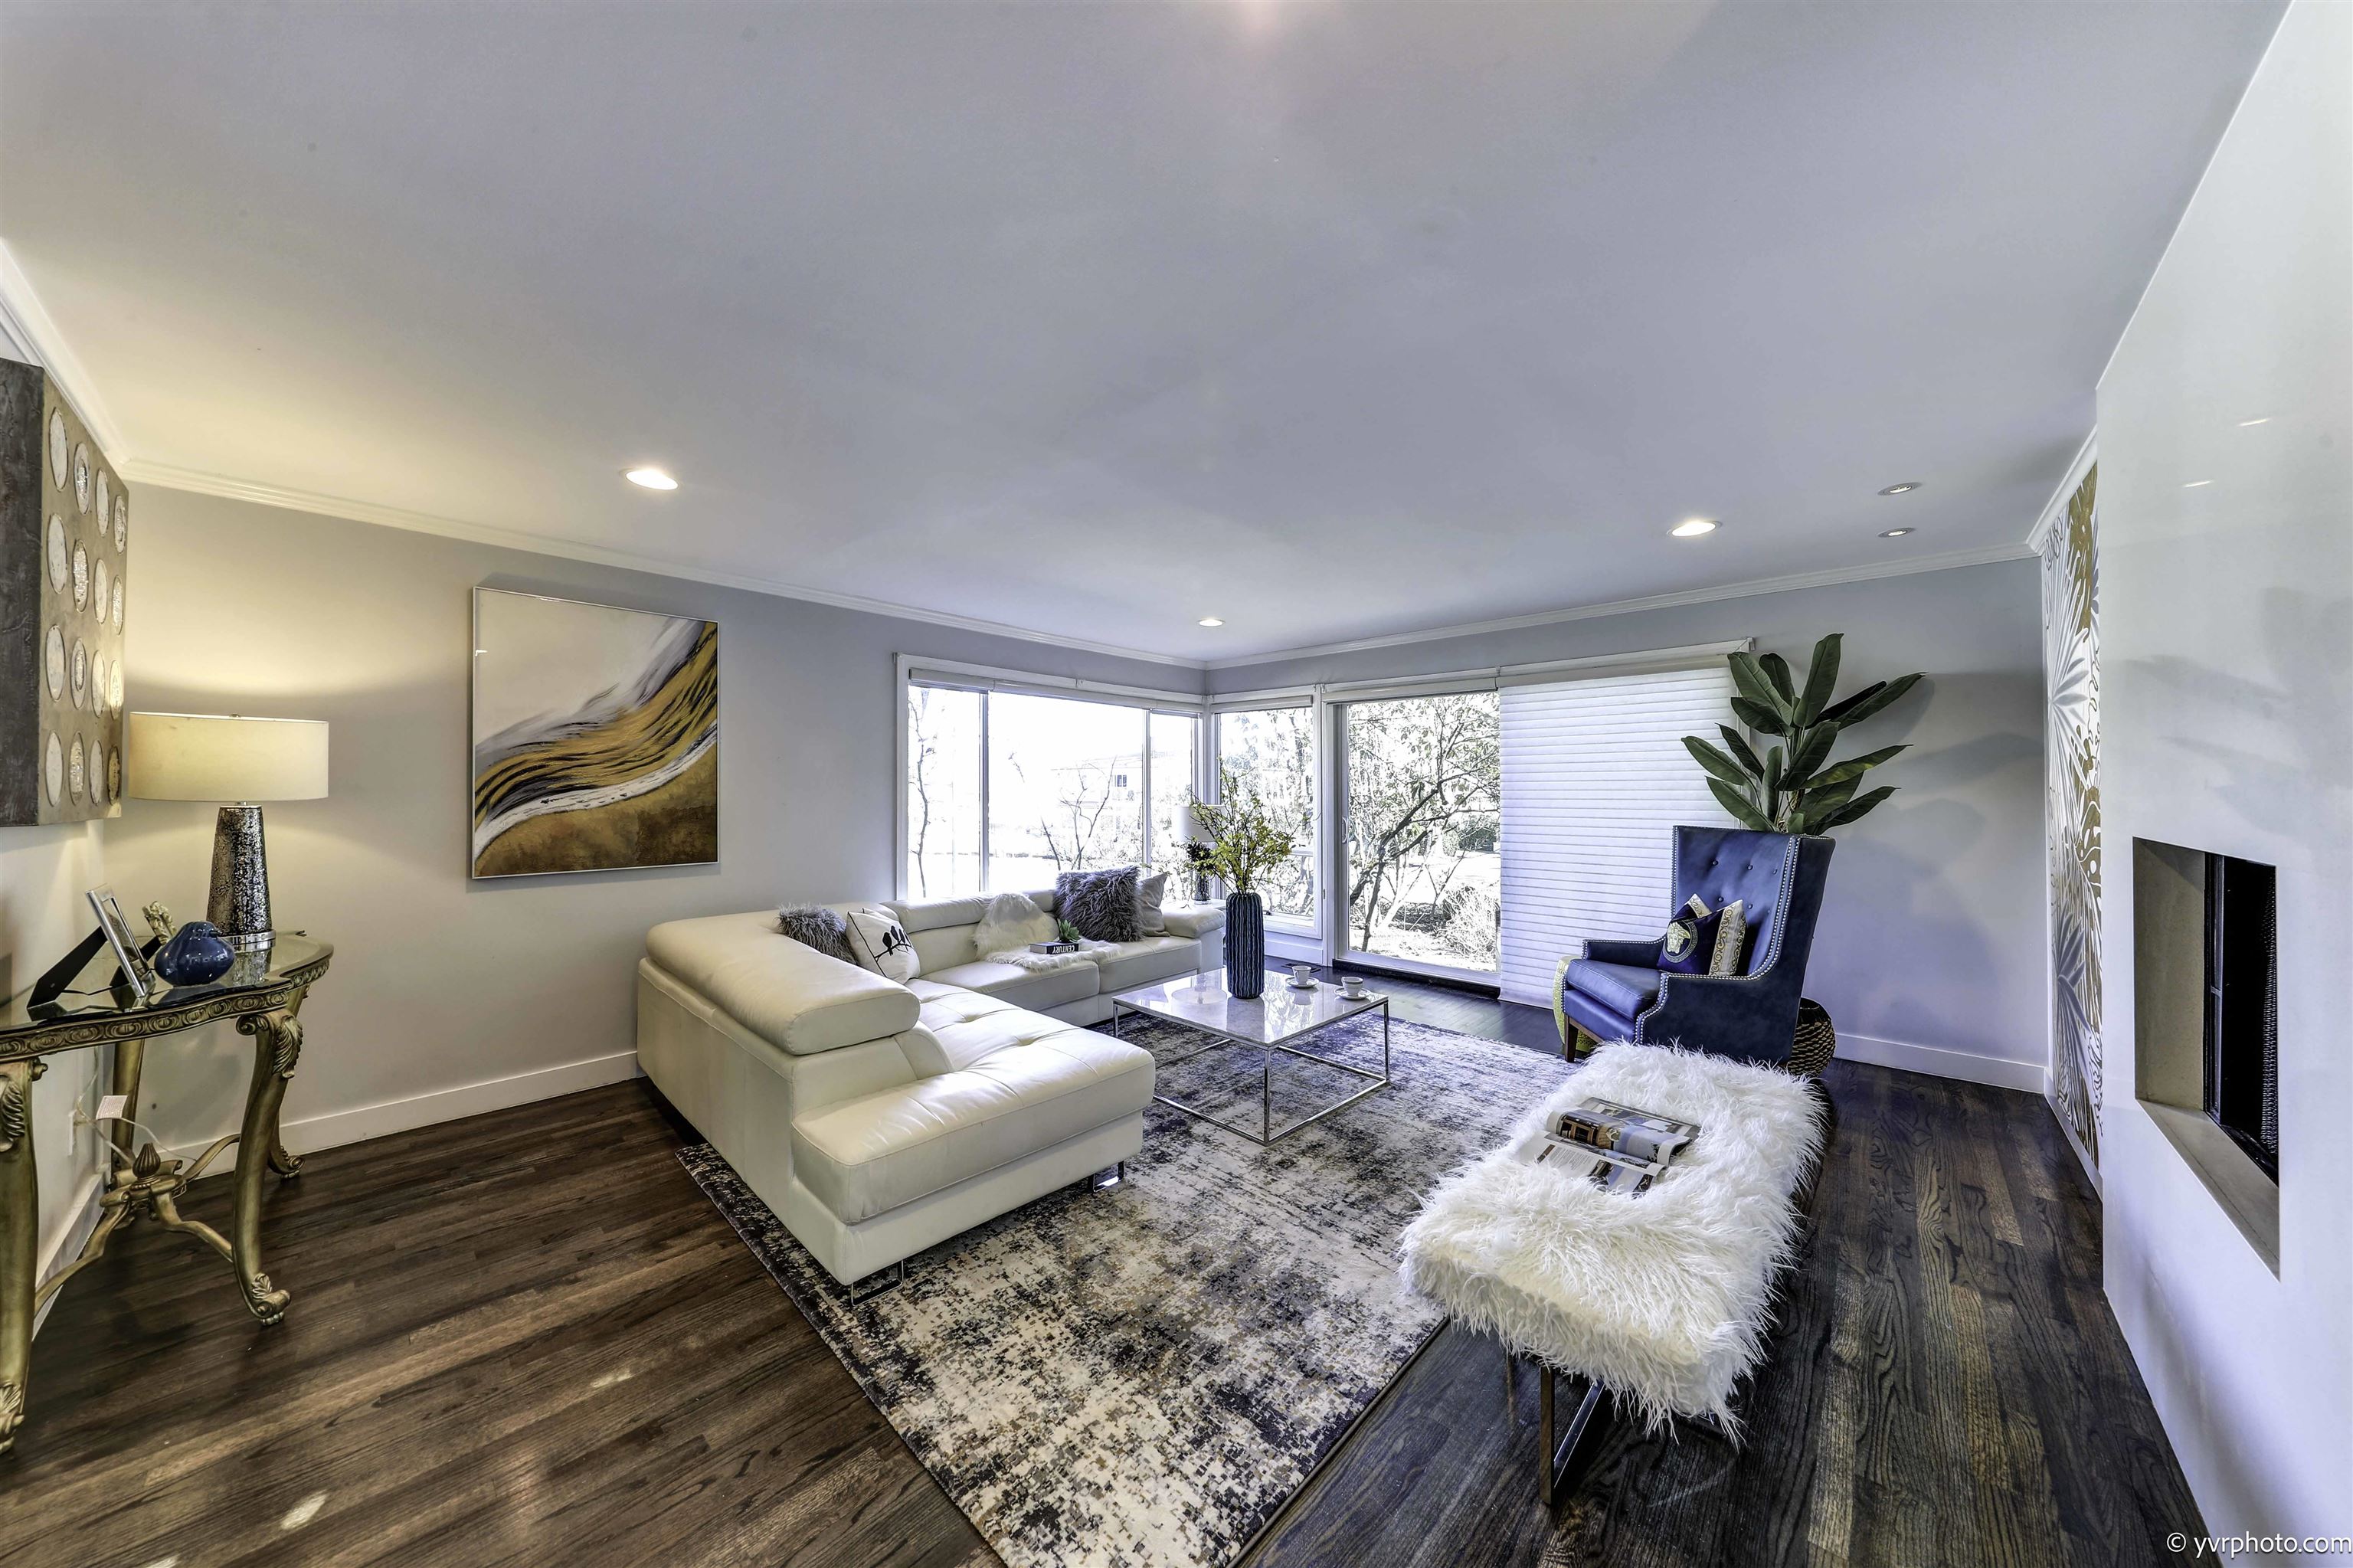 Listing image of 3318 W 22ND AVENUE